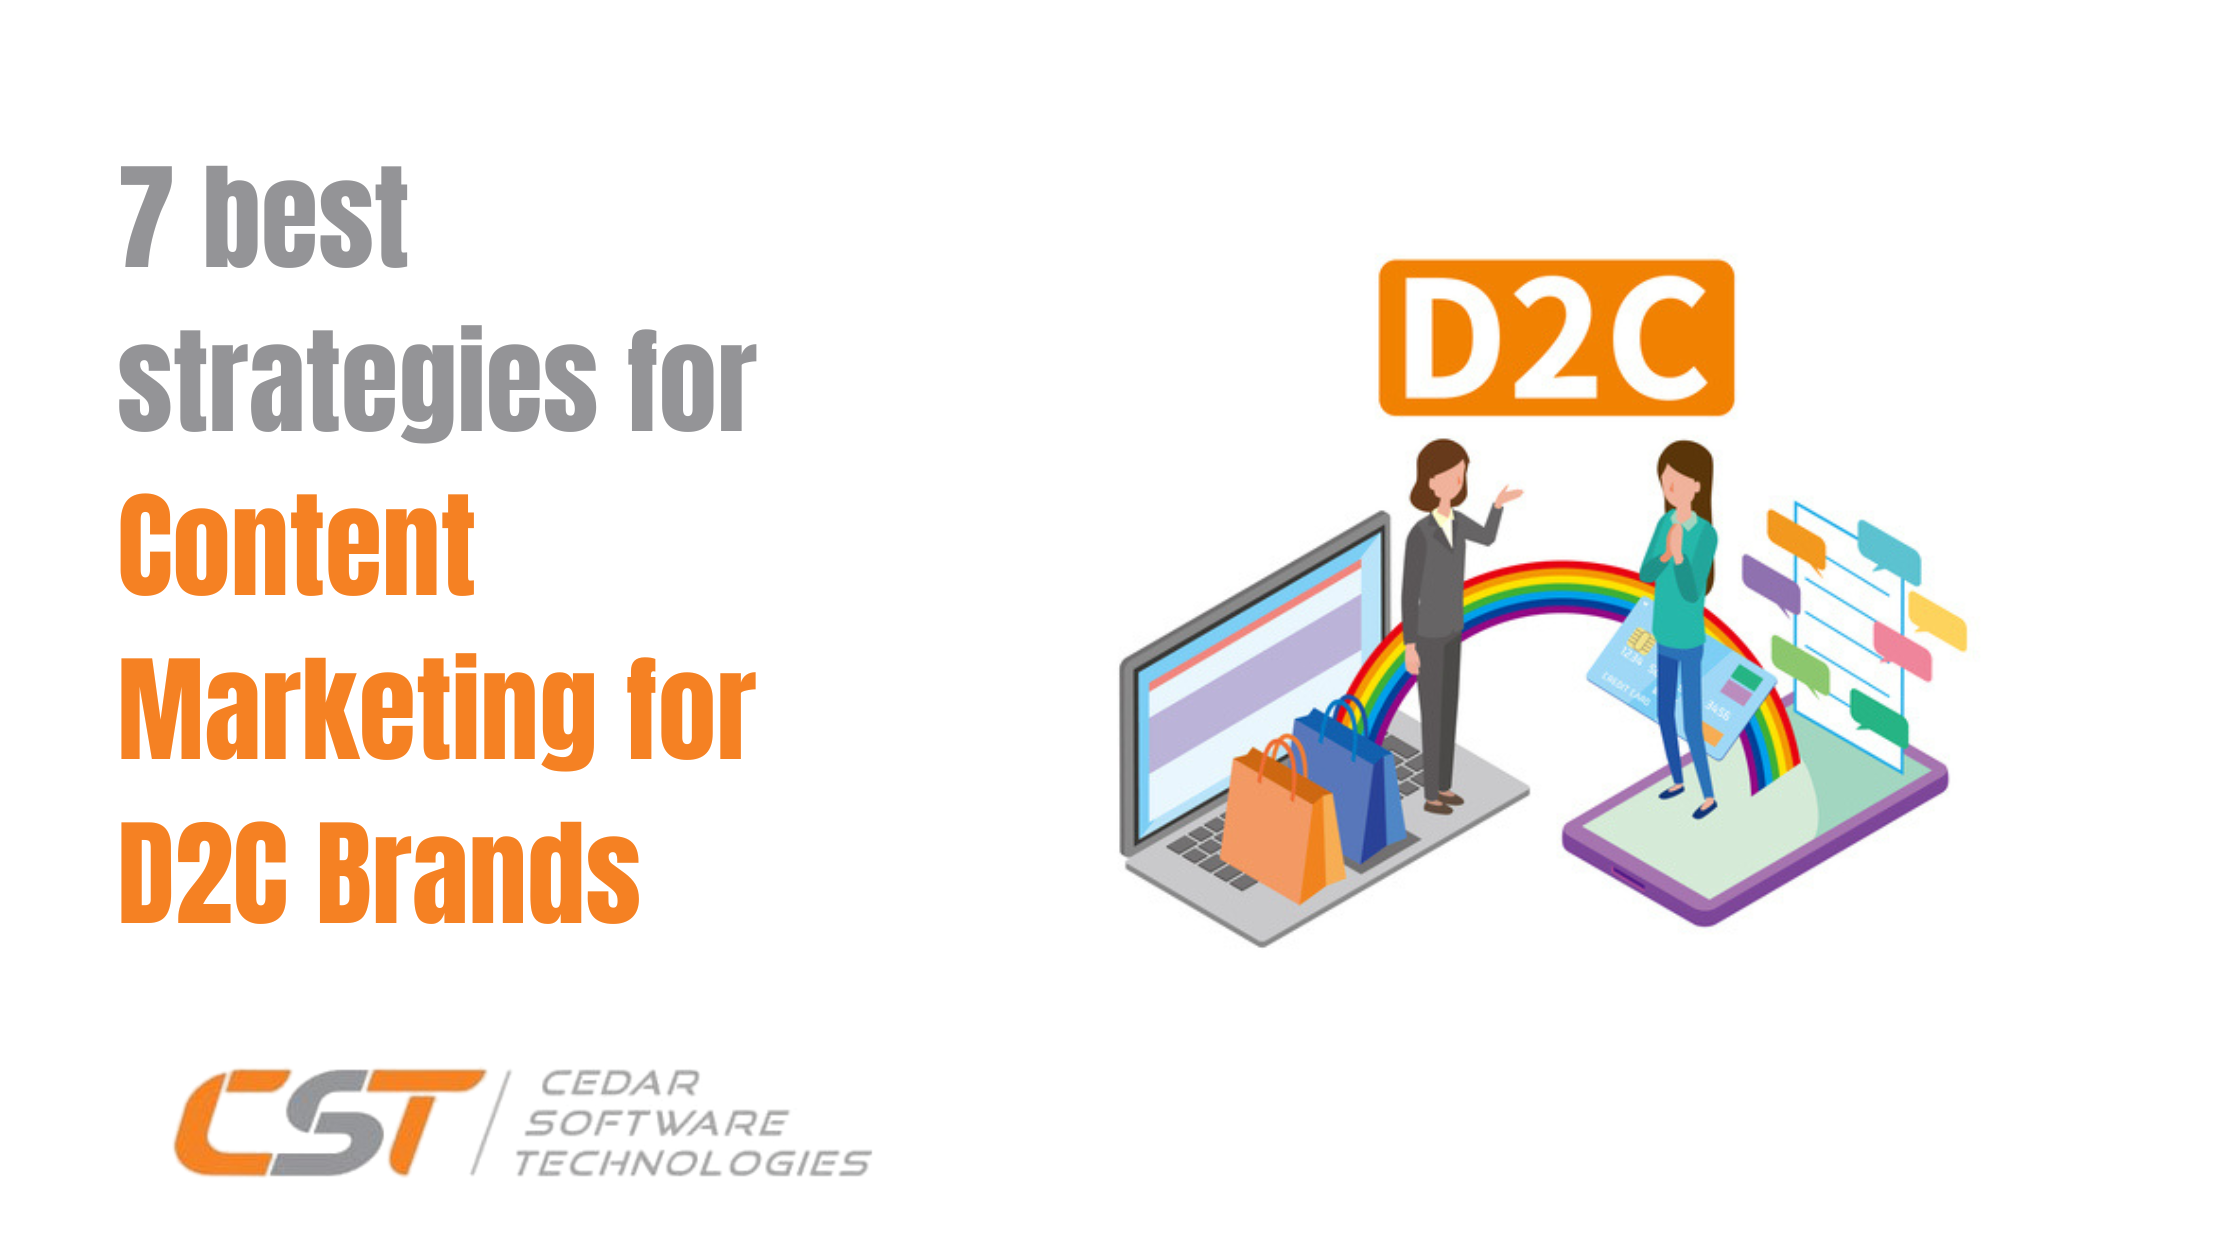 7 best strategies for Content Marketing for D2C Brands